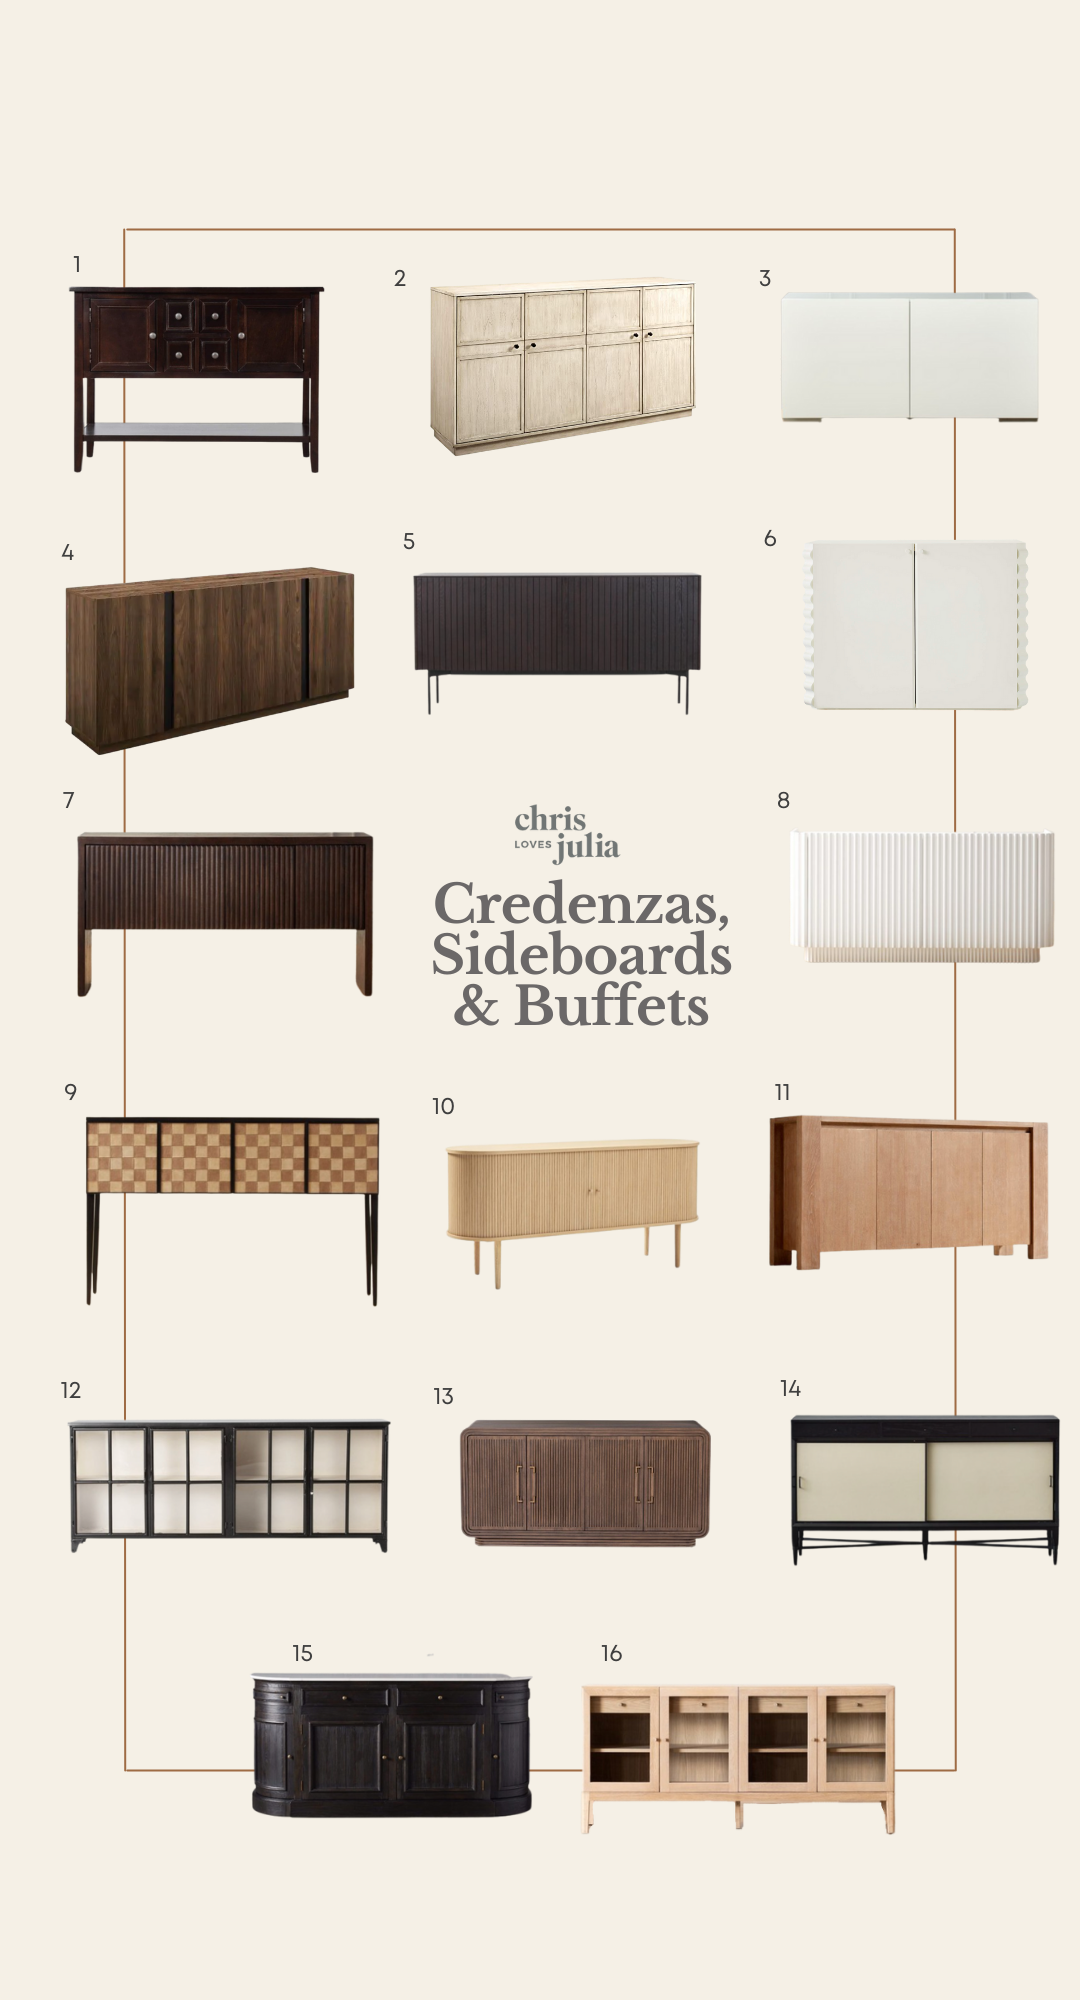 Inaccurate Too silhouette sideboard credenza Less than browse Therefore